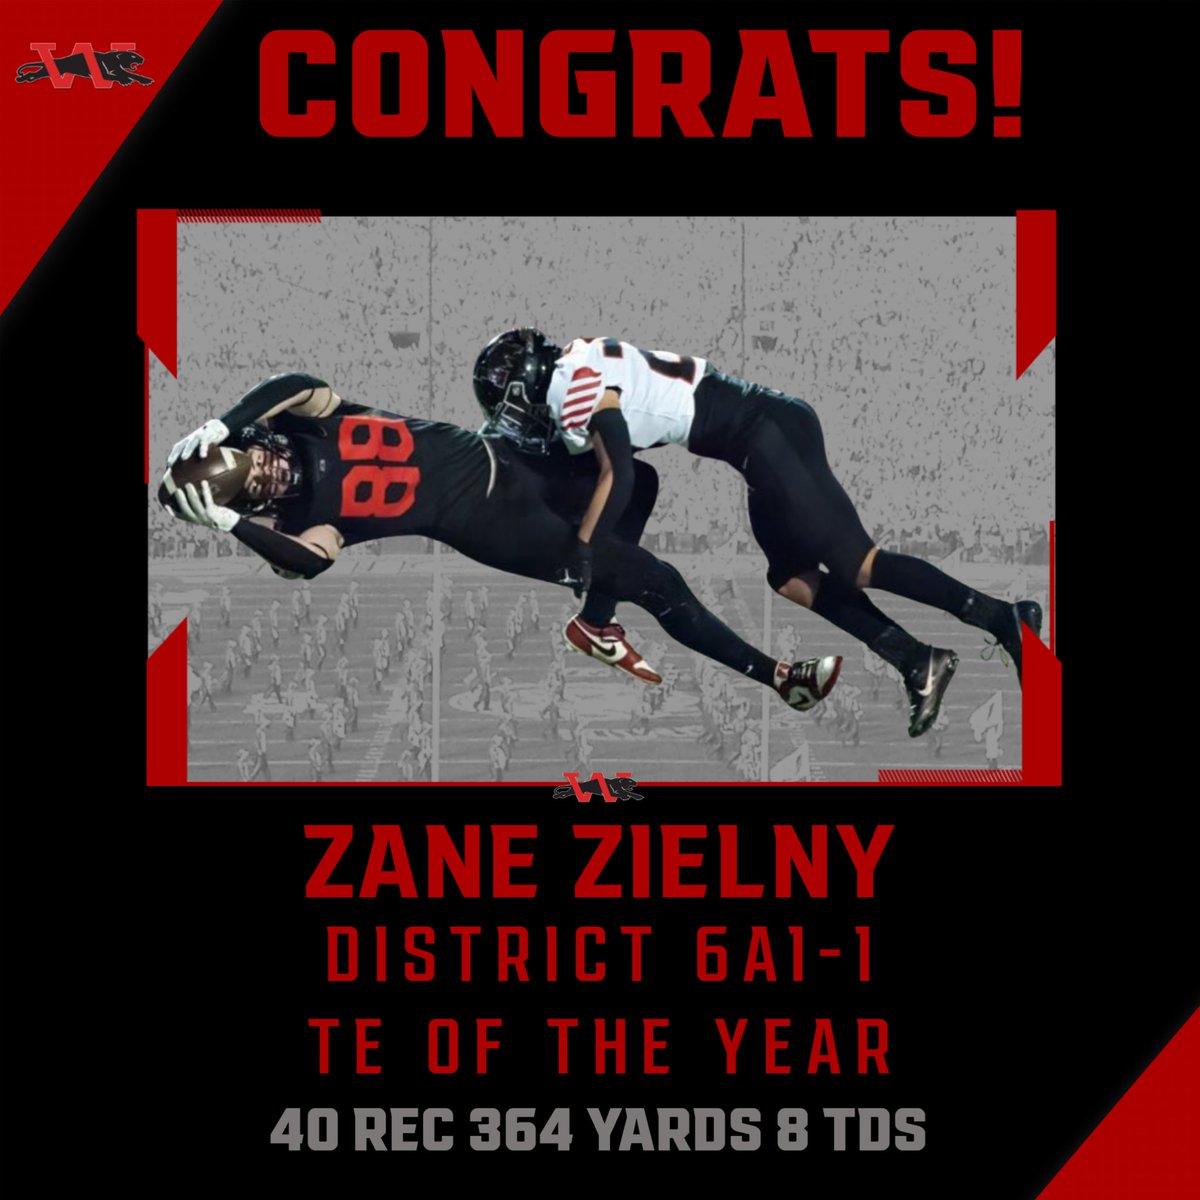 @zane_zielny man I couldn’t be more proud of you. From start to finish you have been the ultimate team guy! I’m so happy you got to put your complete game on display this year for all to see.